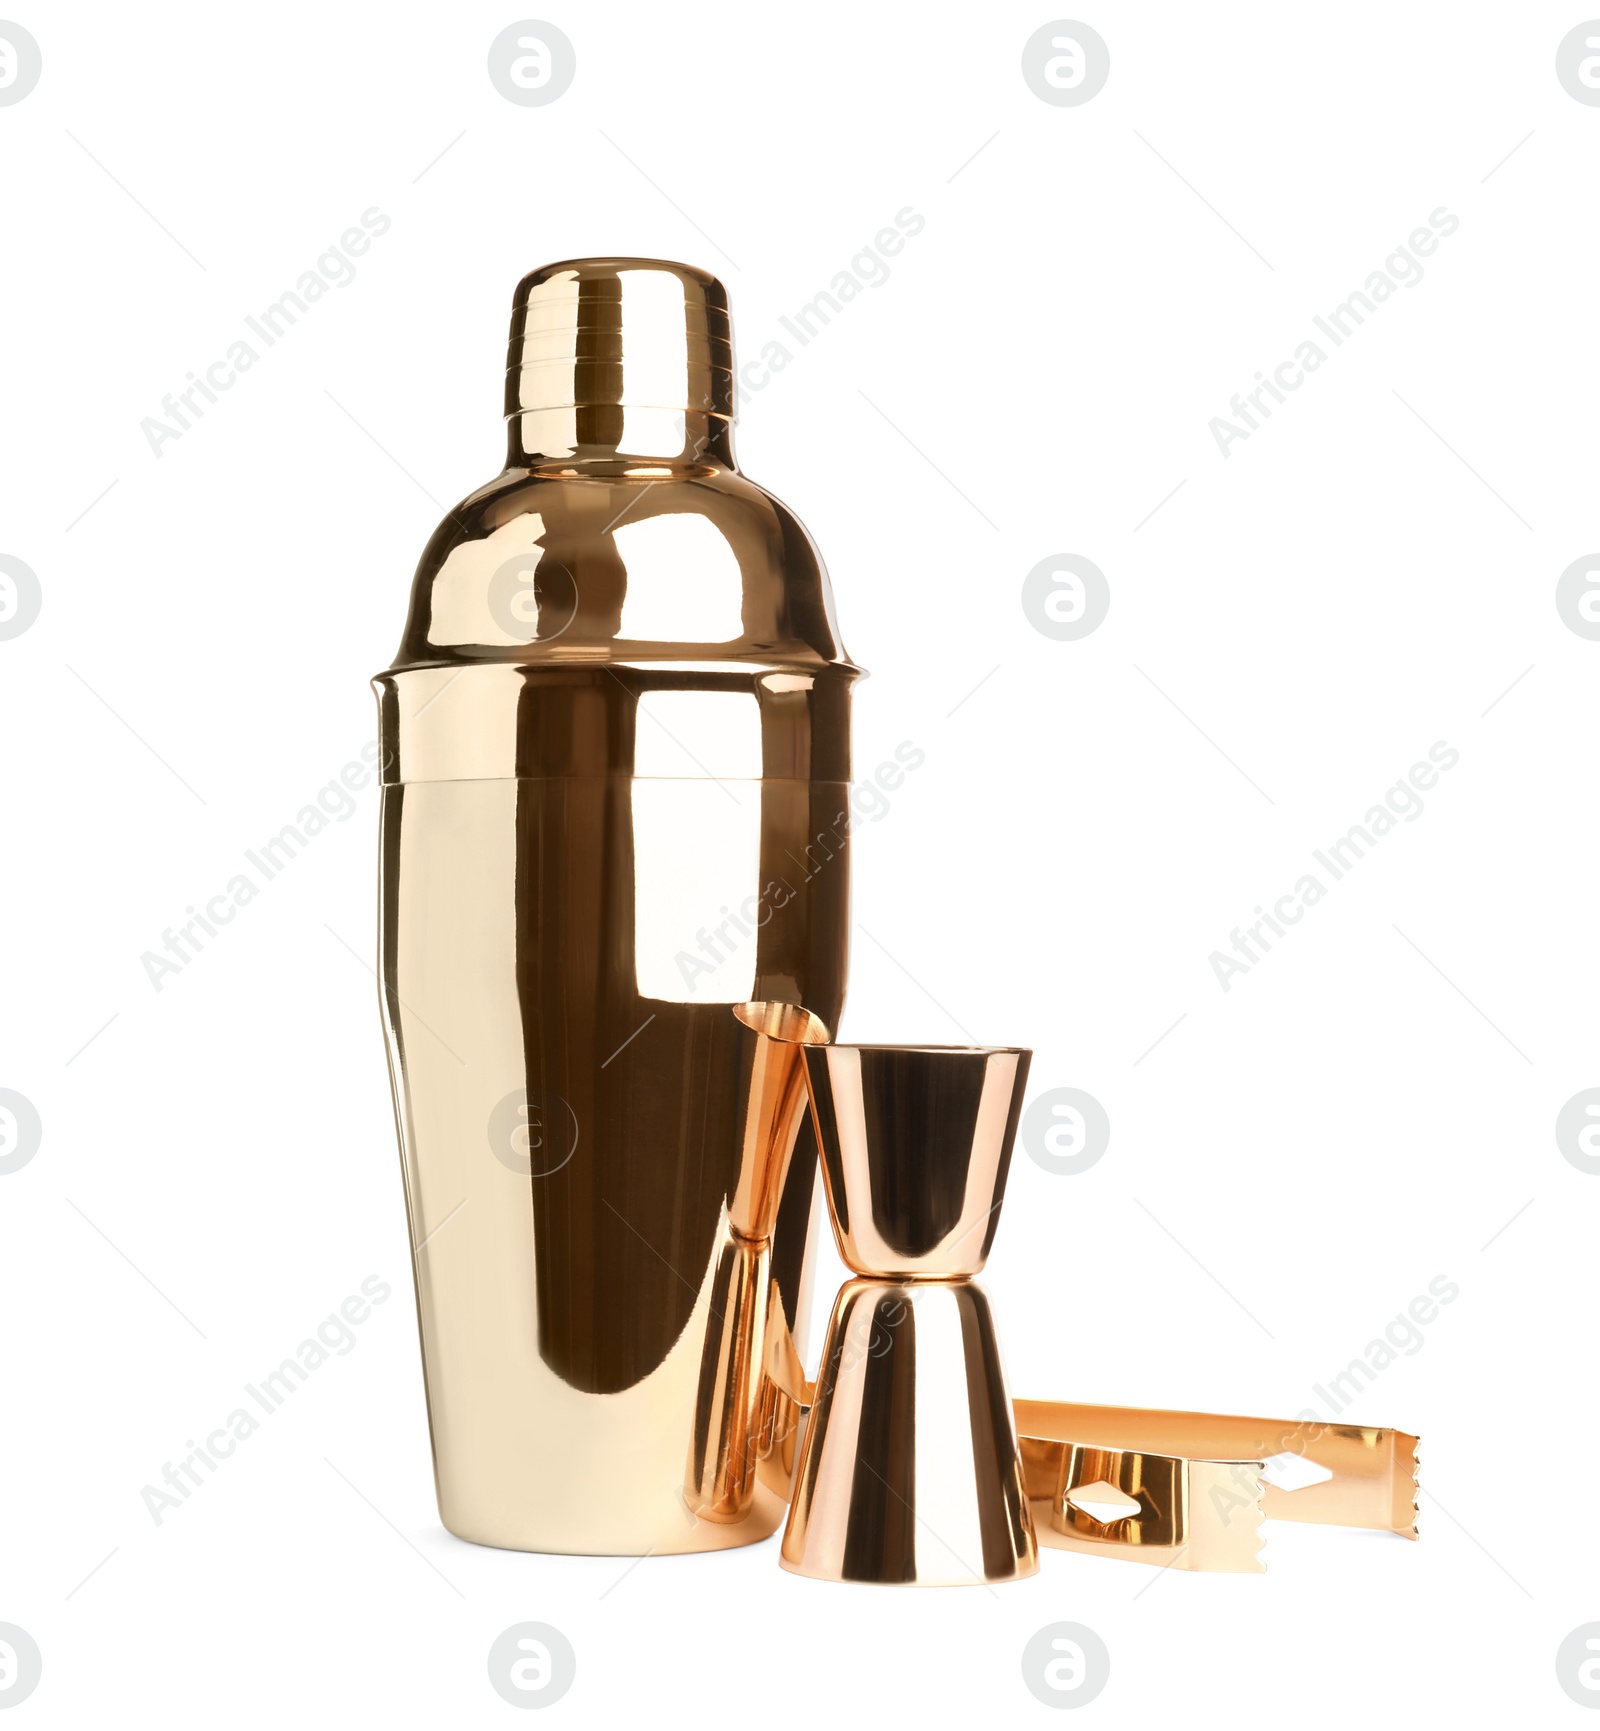 Photo of Metal cocktail shaker, jigger and tongs on white background